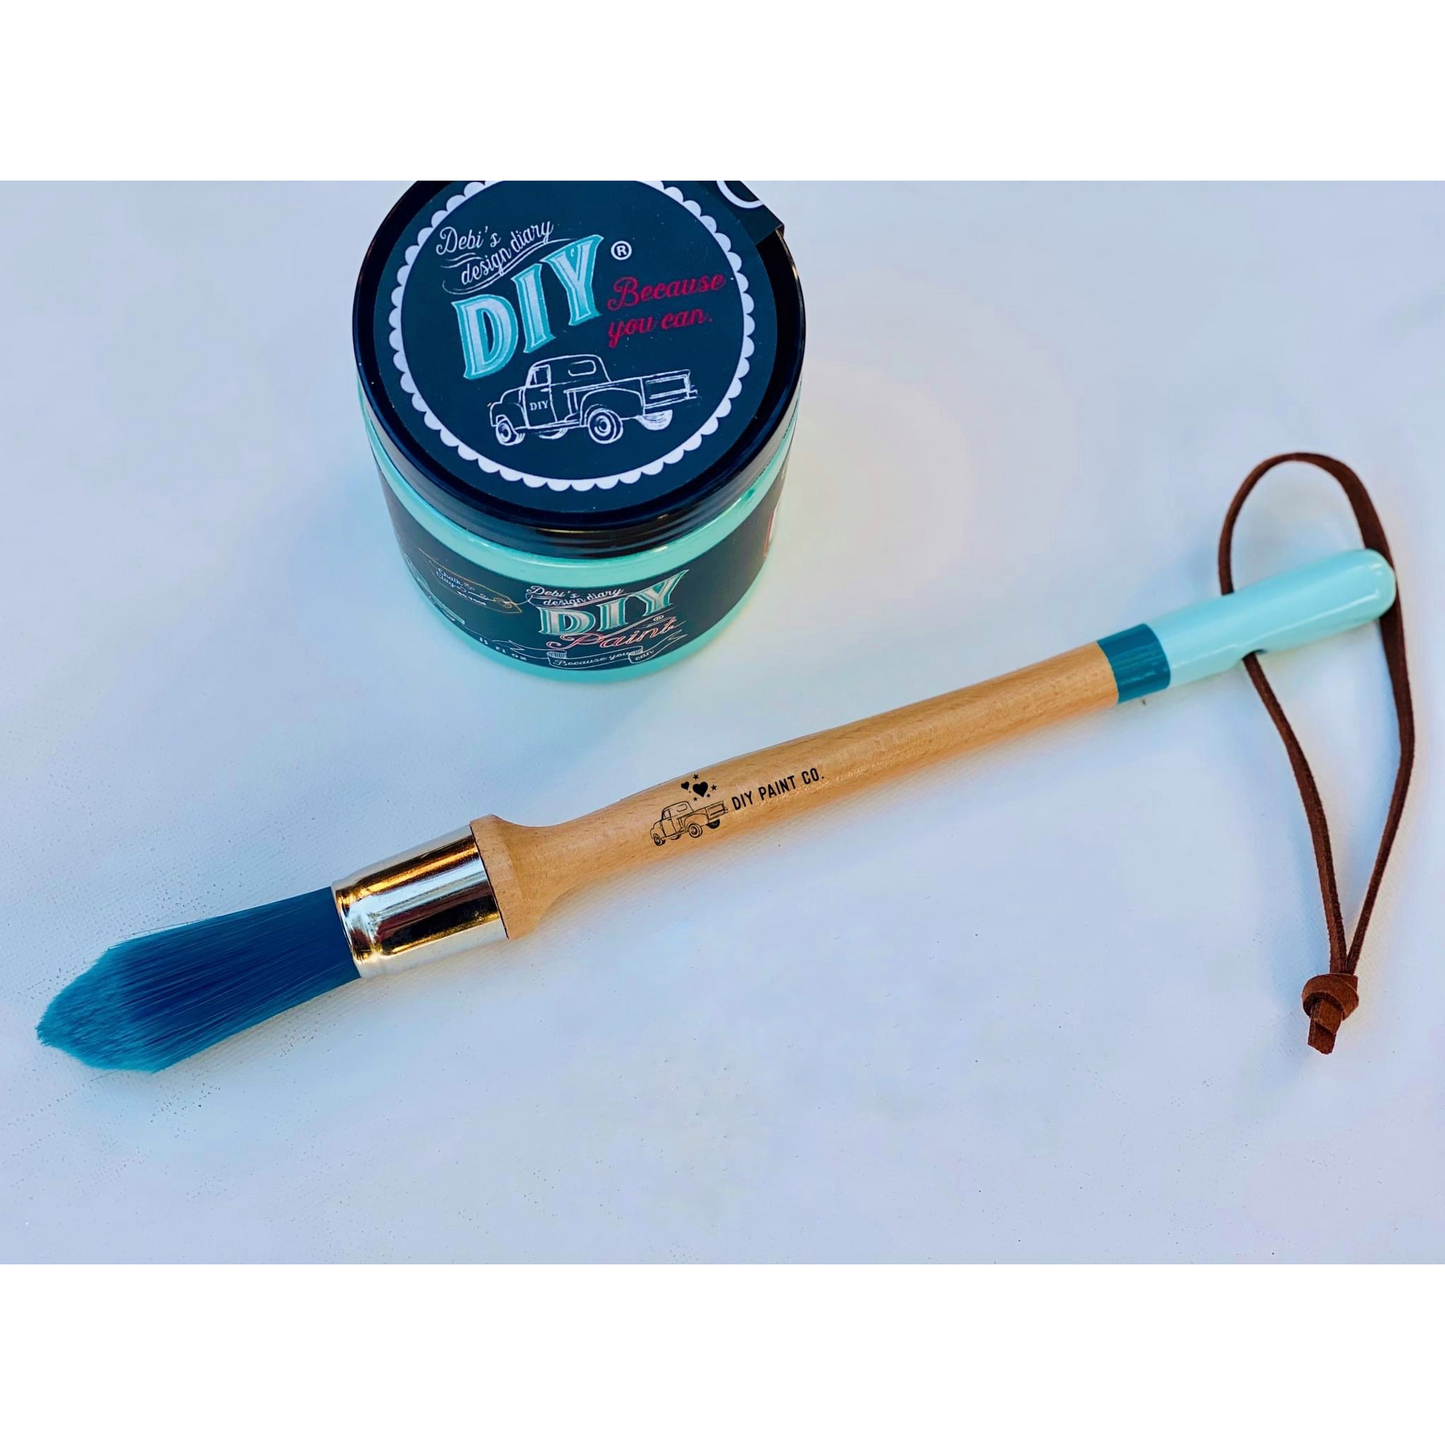 "The Perfectionist" Furniture Brush by DIY Paint. DIY Paint Brushes are available at Milton's Daughter.